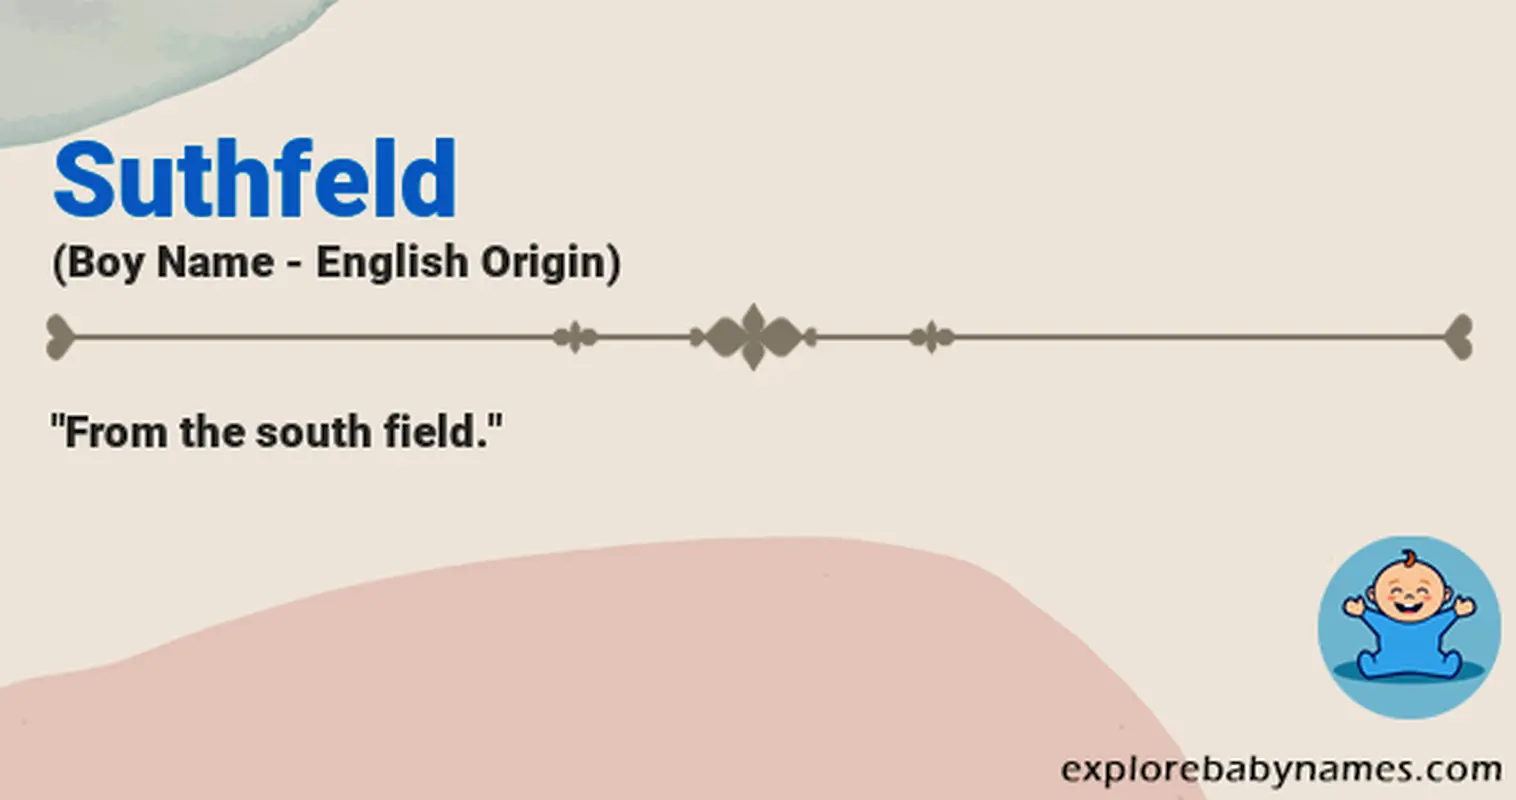 Meaning of Suthfeld